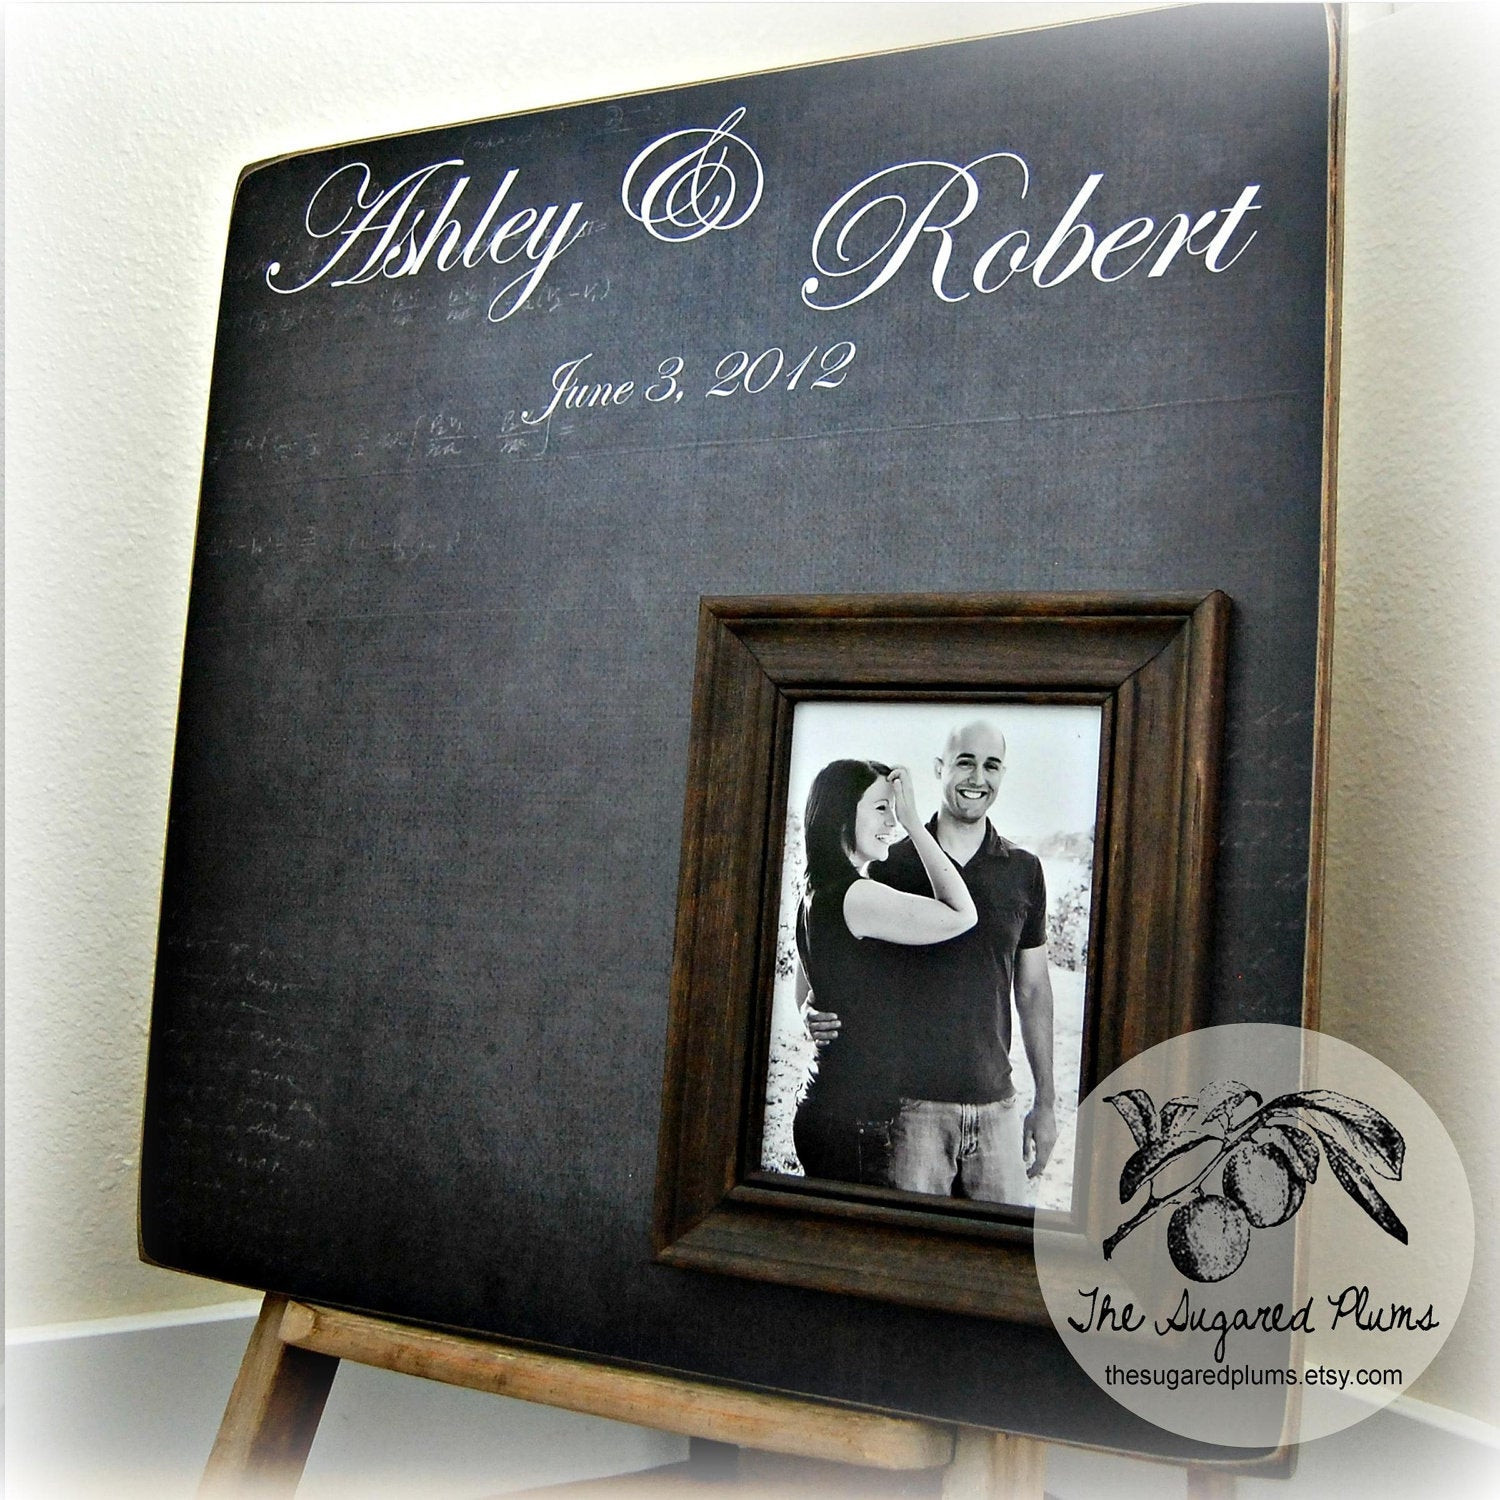 Personalized Guest Book For Wedding
 Personalized WEDDING GUEST BOOK Unique Wedding Guest Book